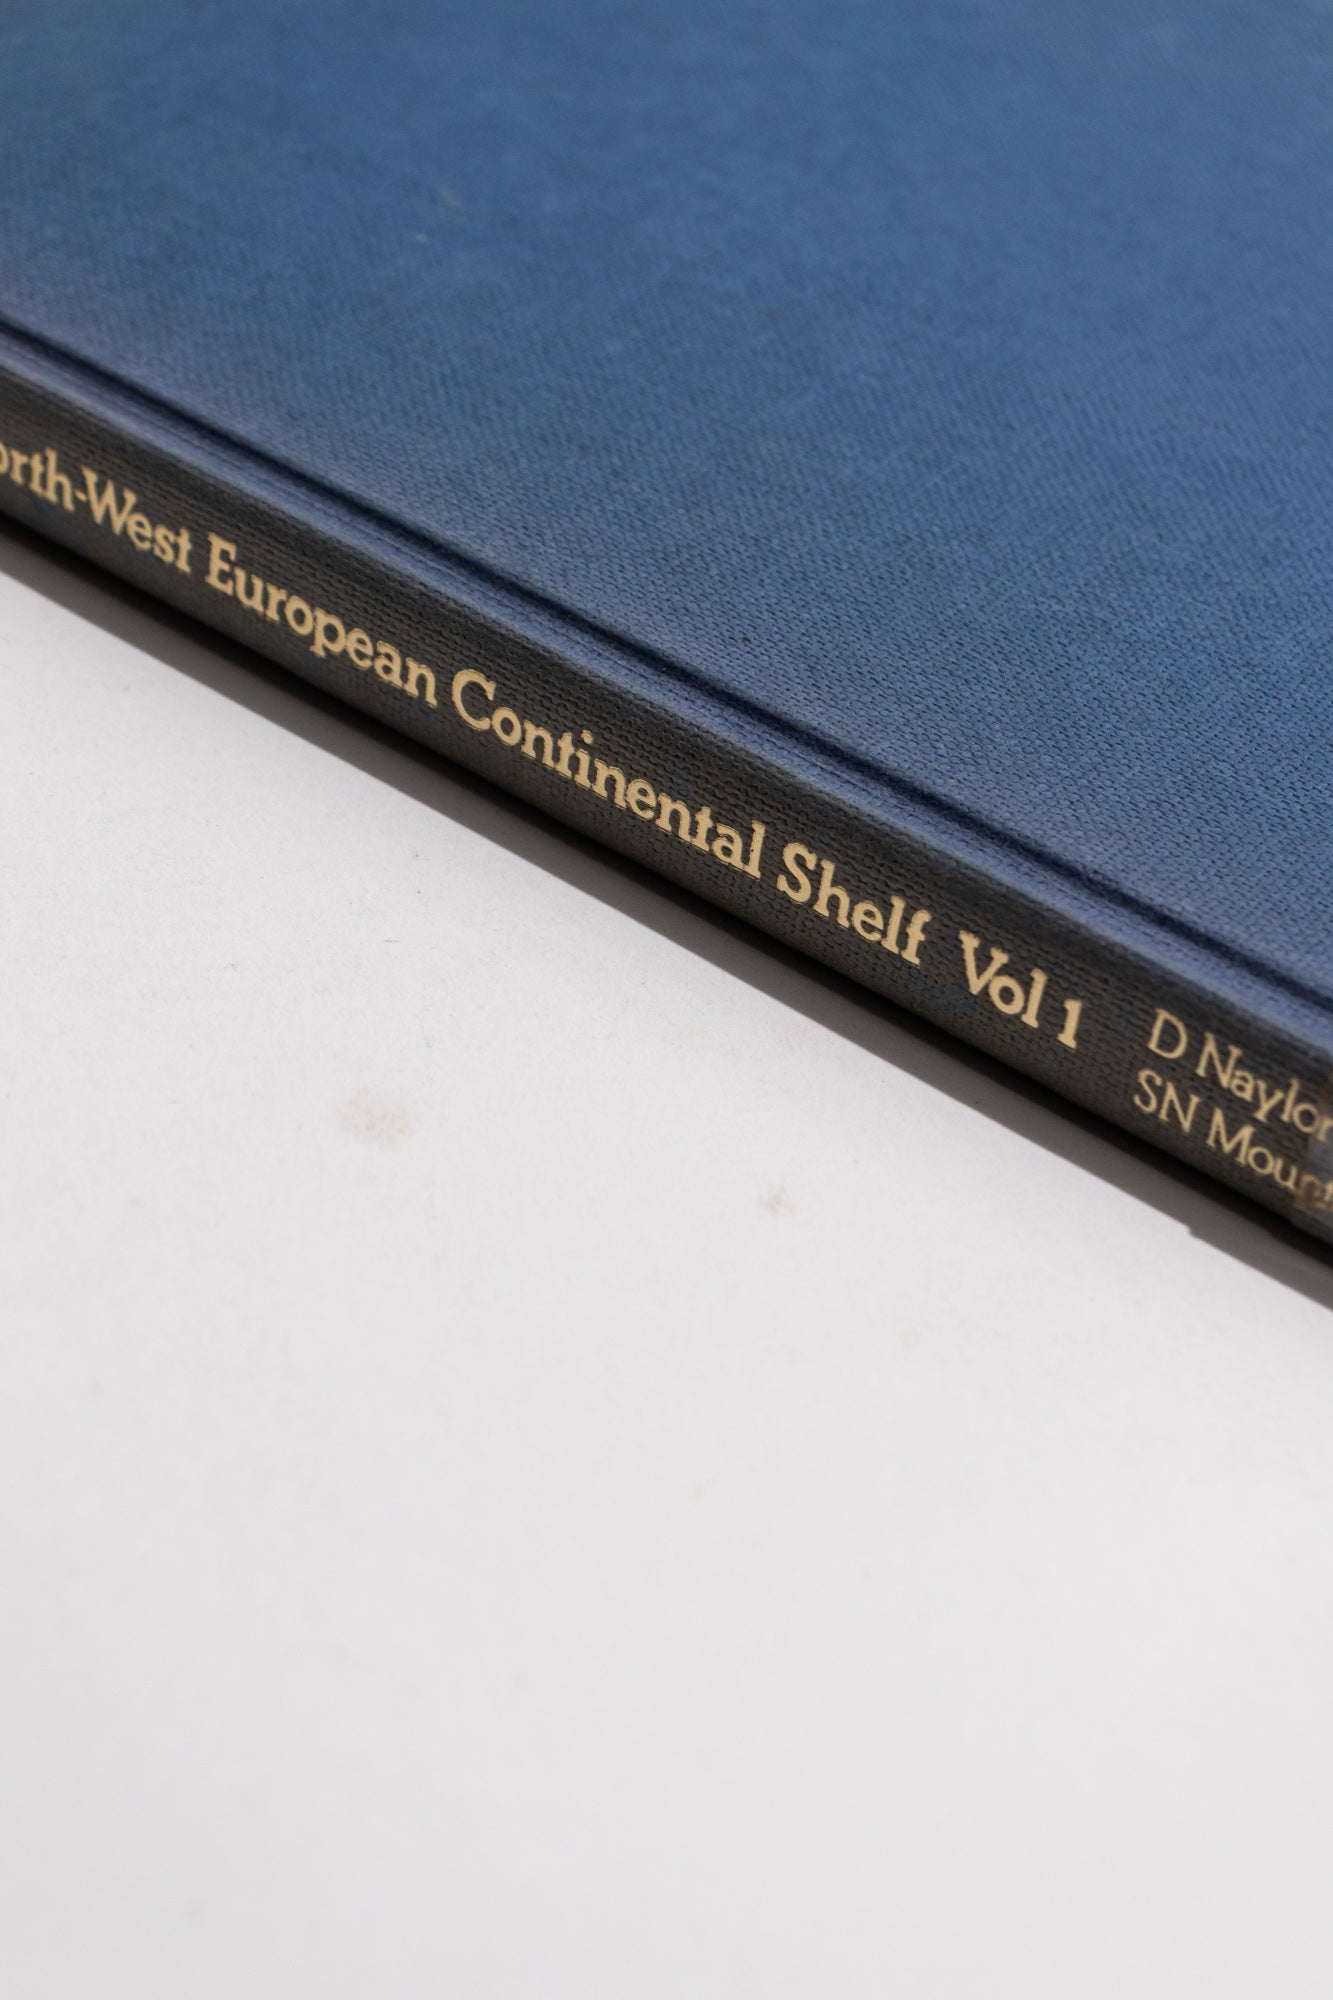 Geology of the North-West European Continental Shelf